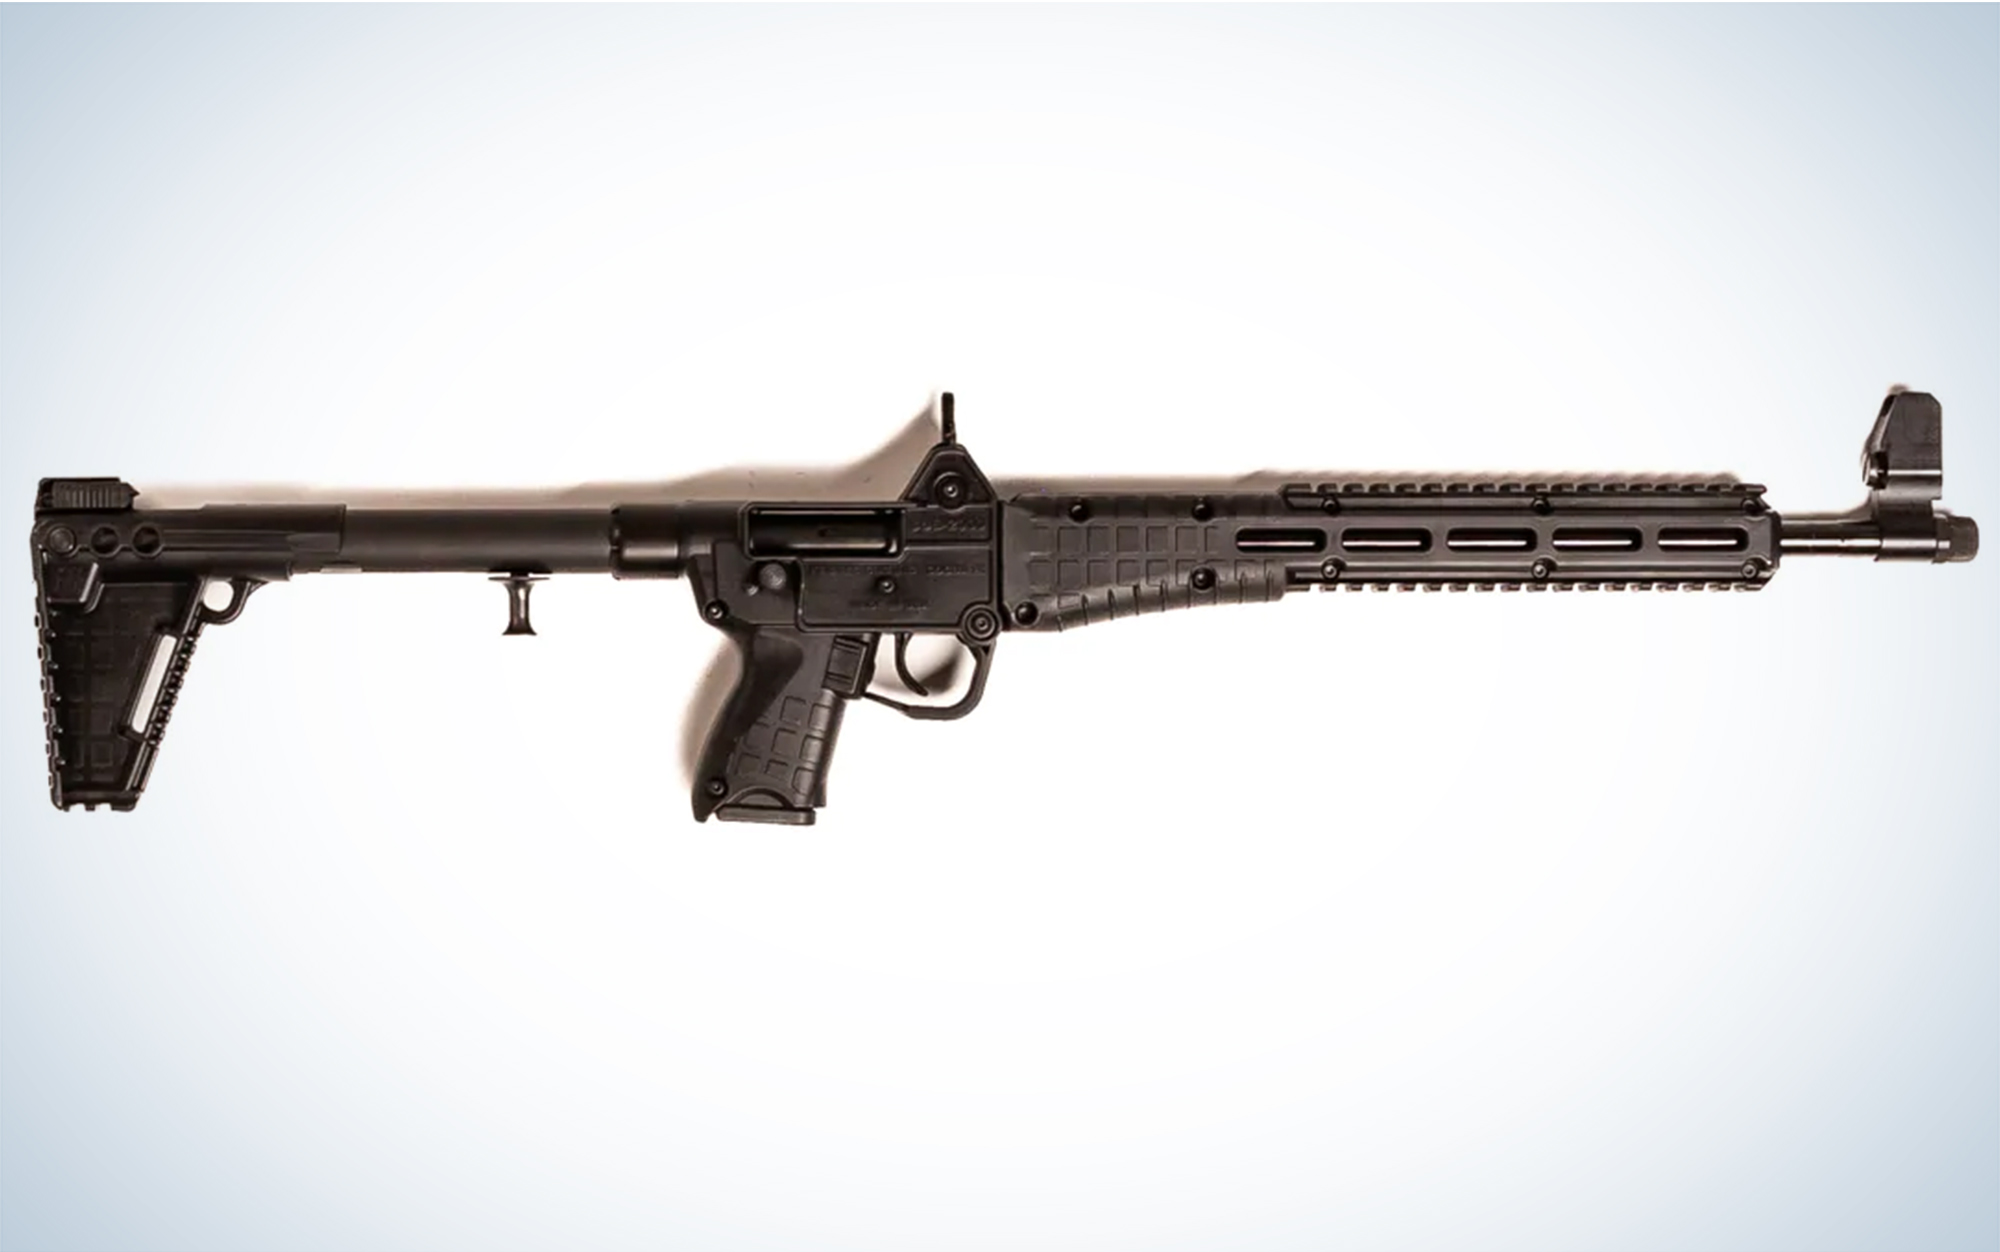 The Kel-Tec SUB2000 is one of the best survival rifles.